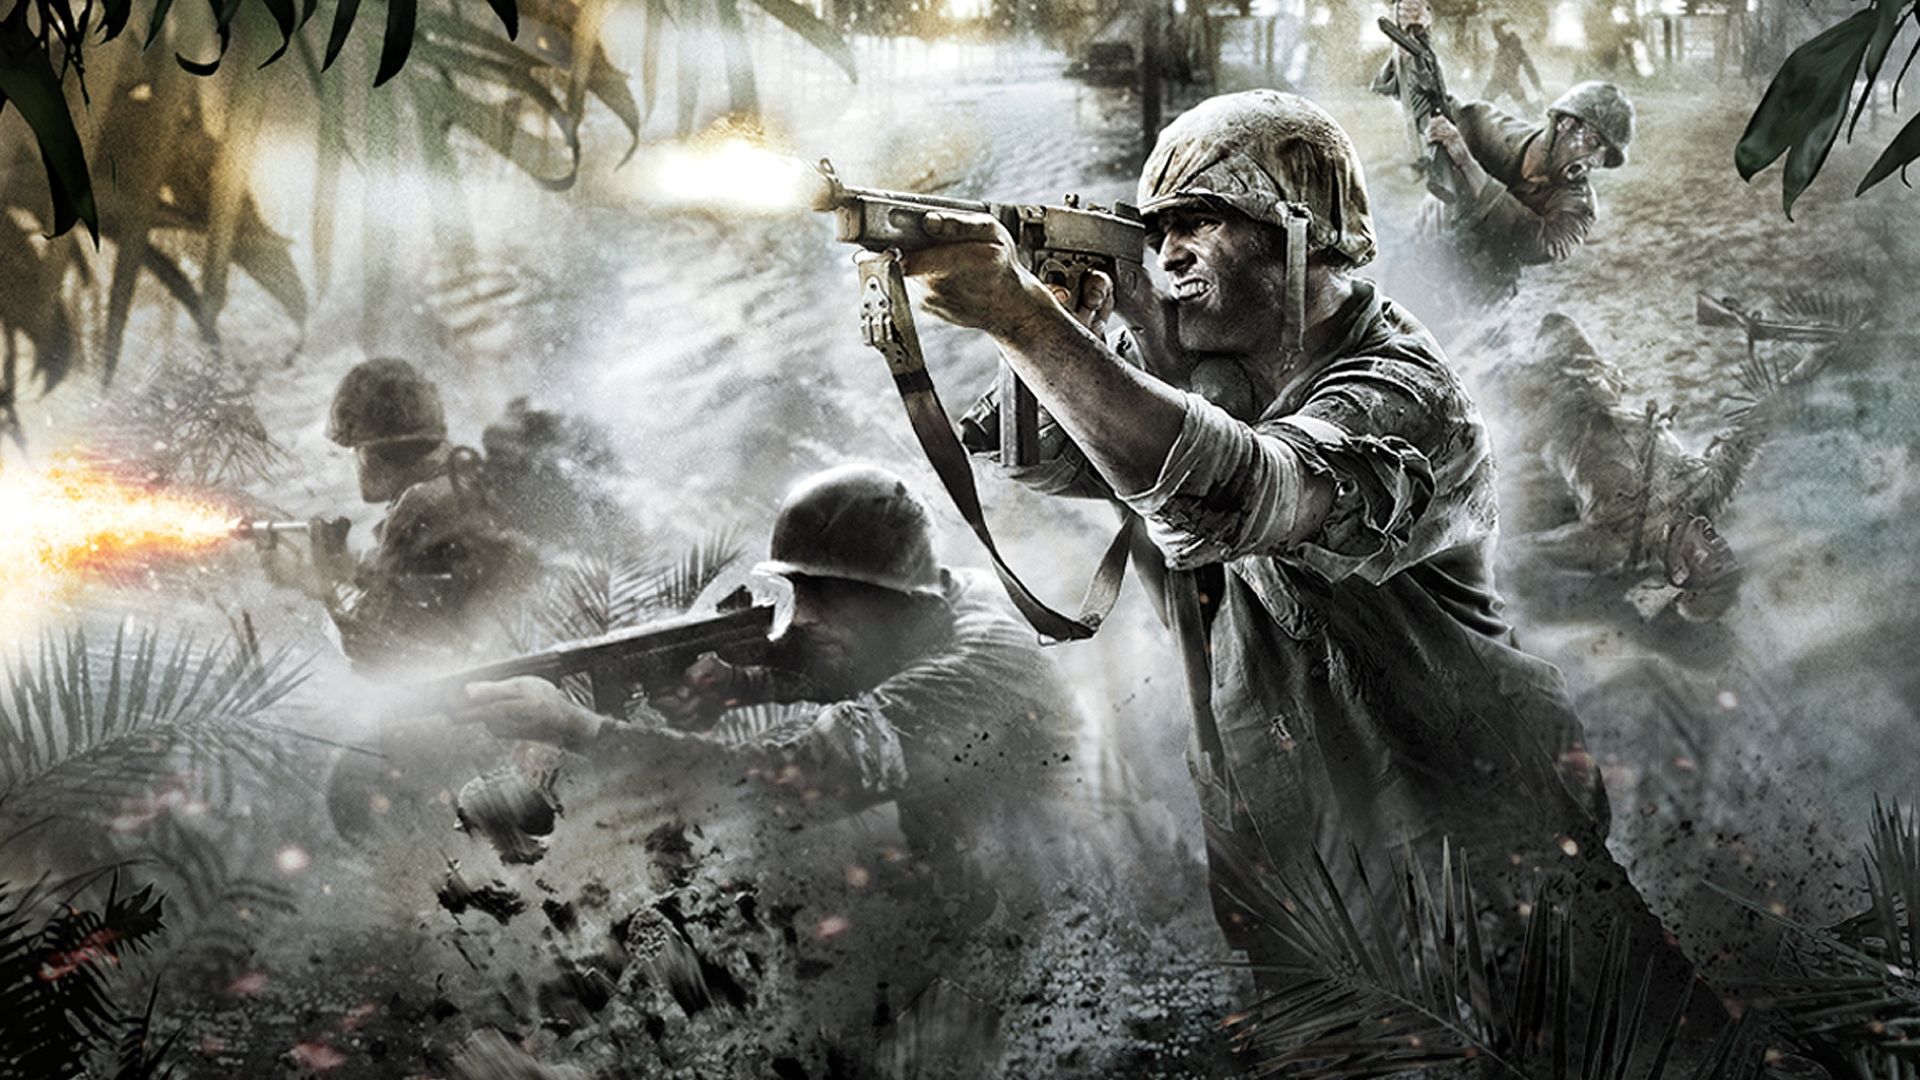 war wallpaper hd,action adventure game,pc game,soldier,photography,illustration